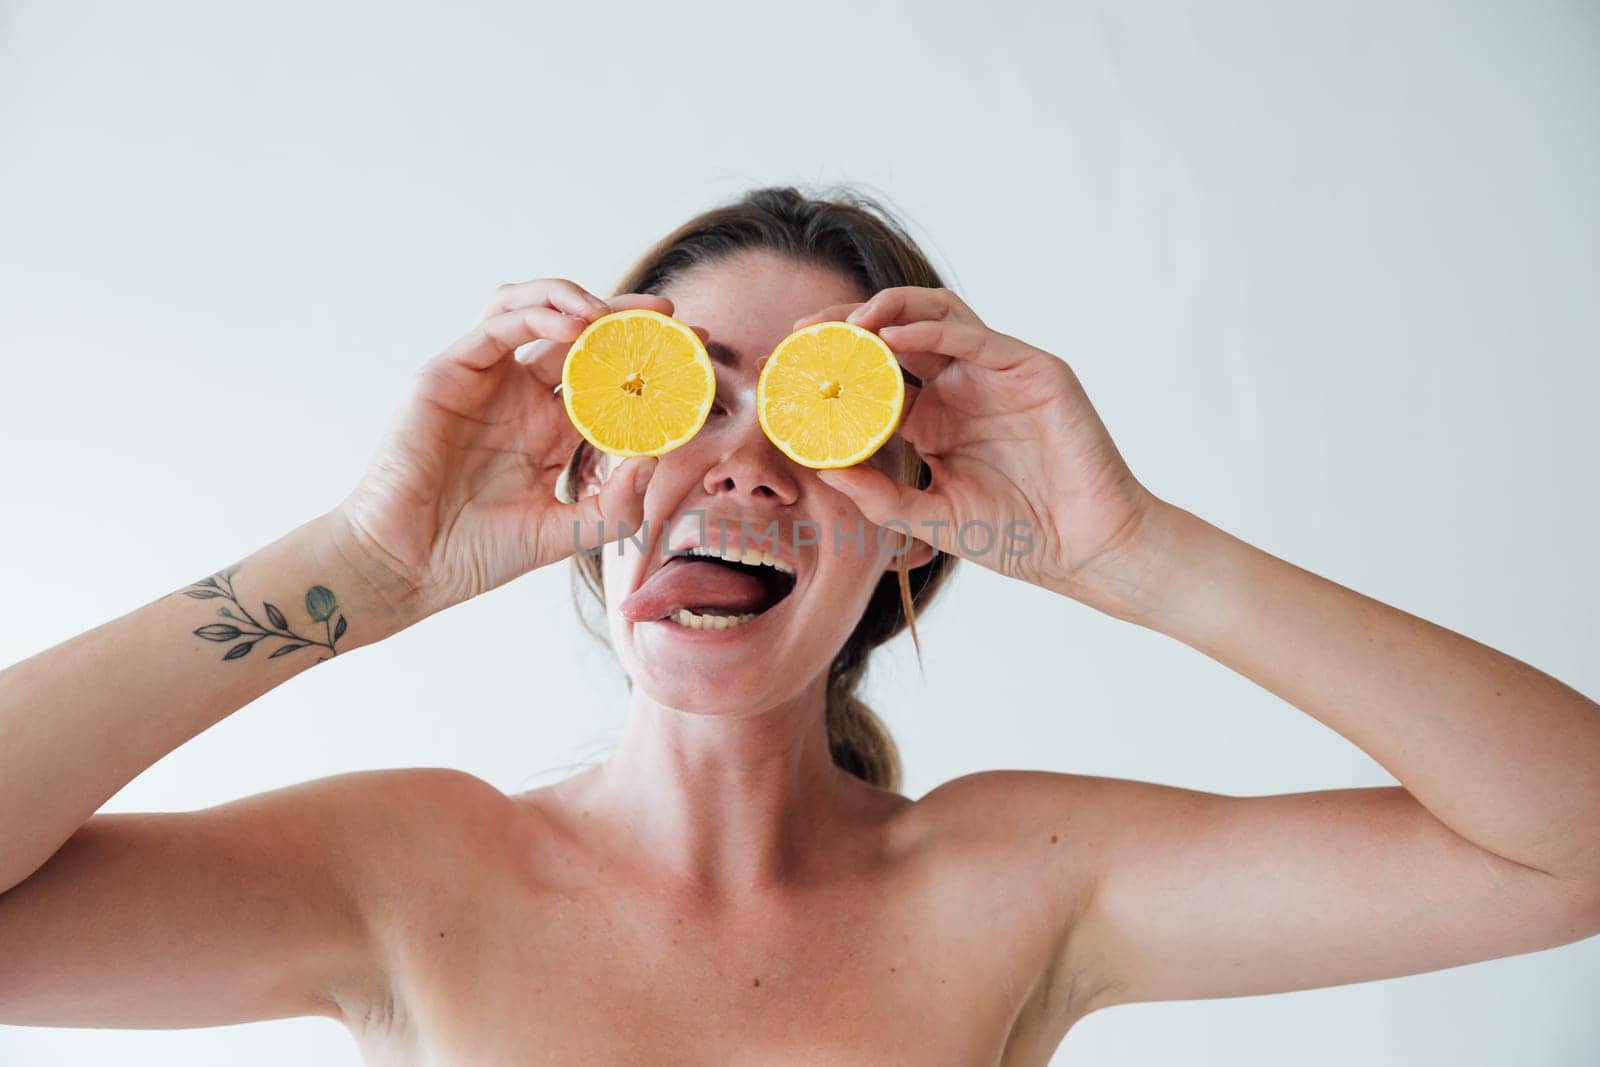 woman with oranges by her eyes shows her tongue